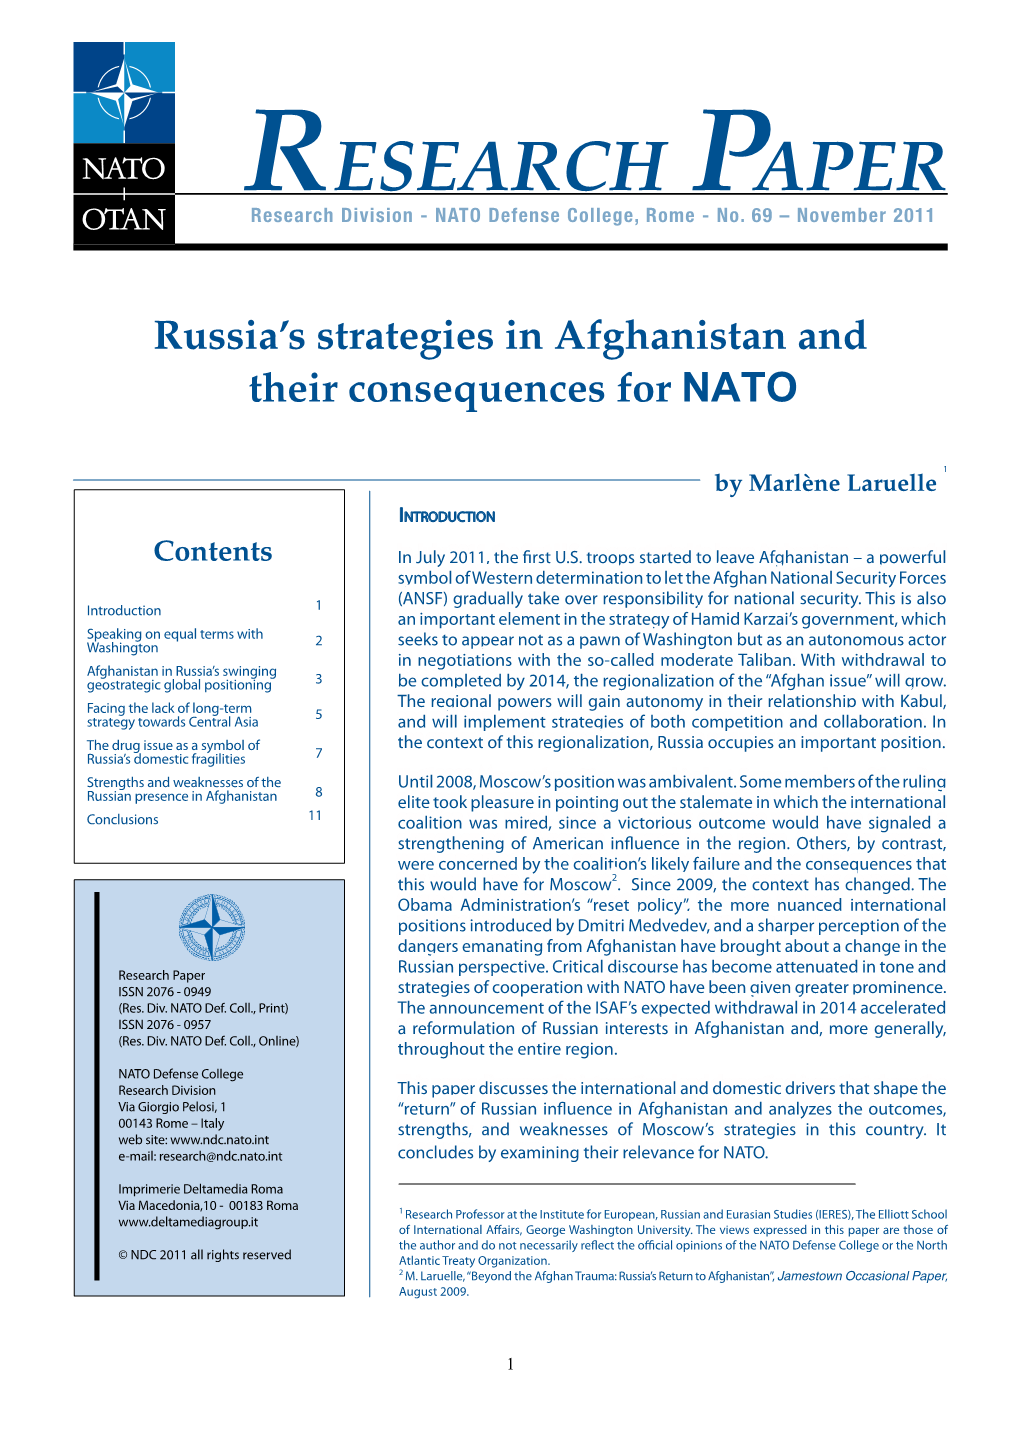 Russia's Strategies in Afghanistan and Their Consequences for NATO